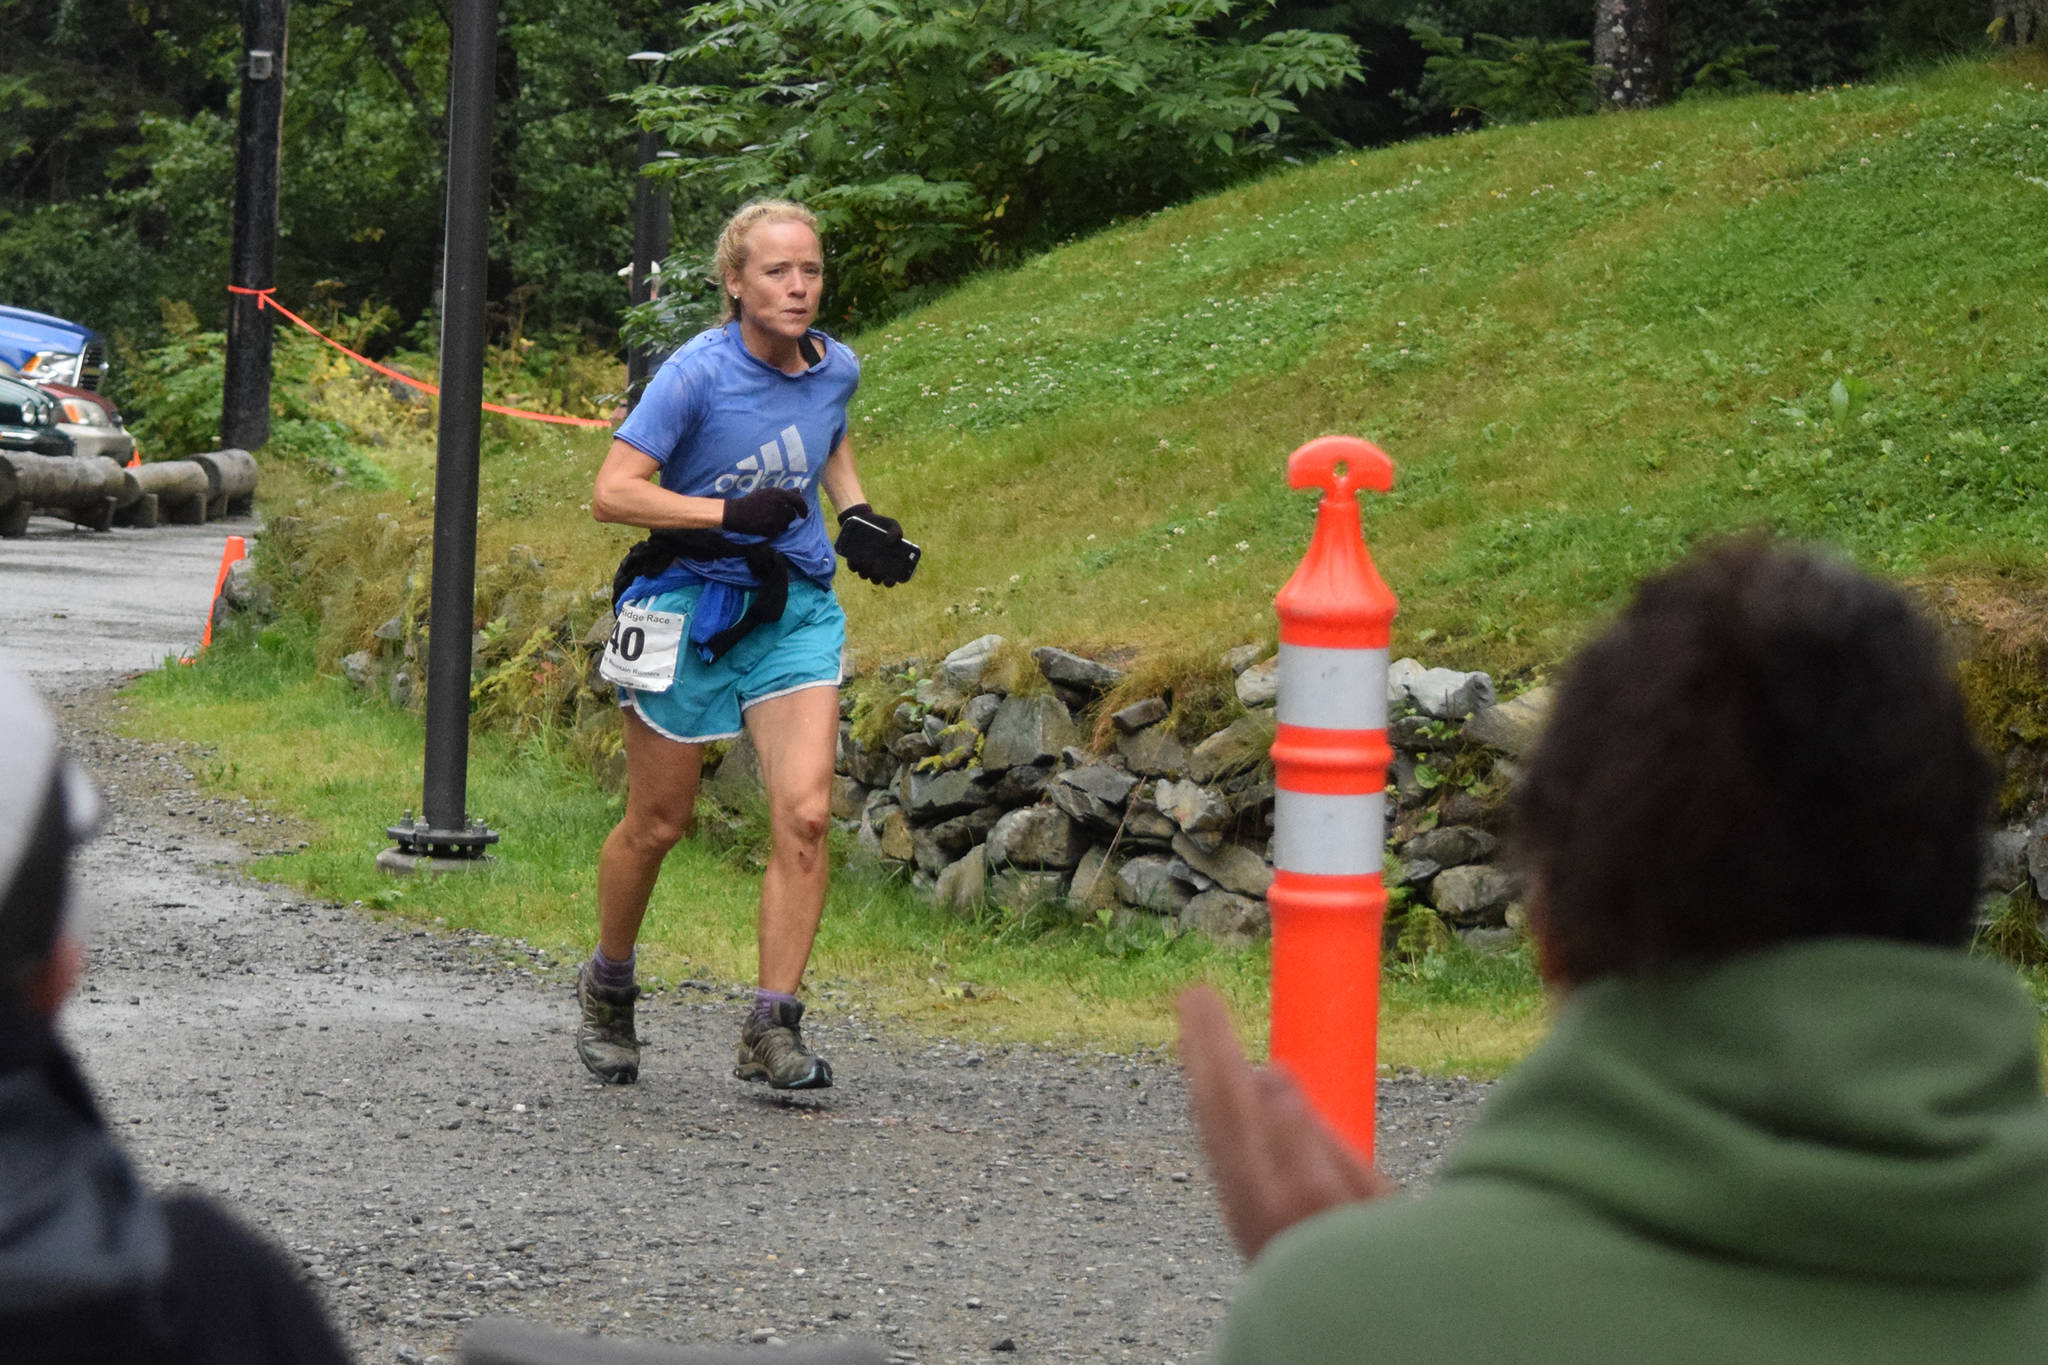 Barbara Baysinger completes the Juneau Ridge Race at Cope Park on Saturday, July 20, 2019. Over 60 runners participated in the 15-mile mountain running race that featured approximately 5,000 feet of elevation gain, including around 20 women. (Nolin Ainsworth | Juneau Empire)